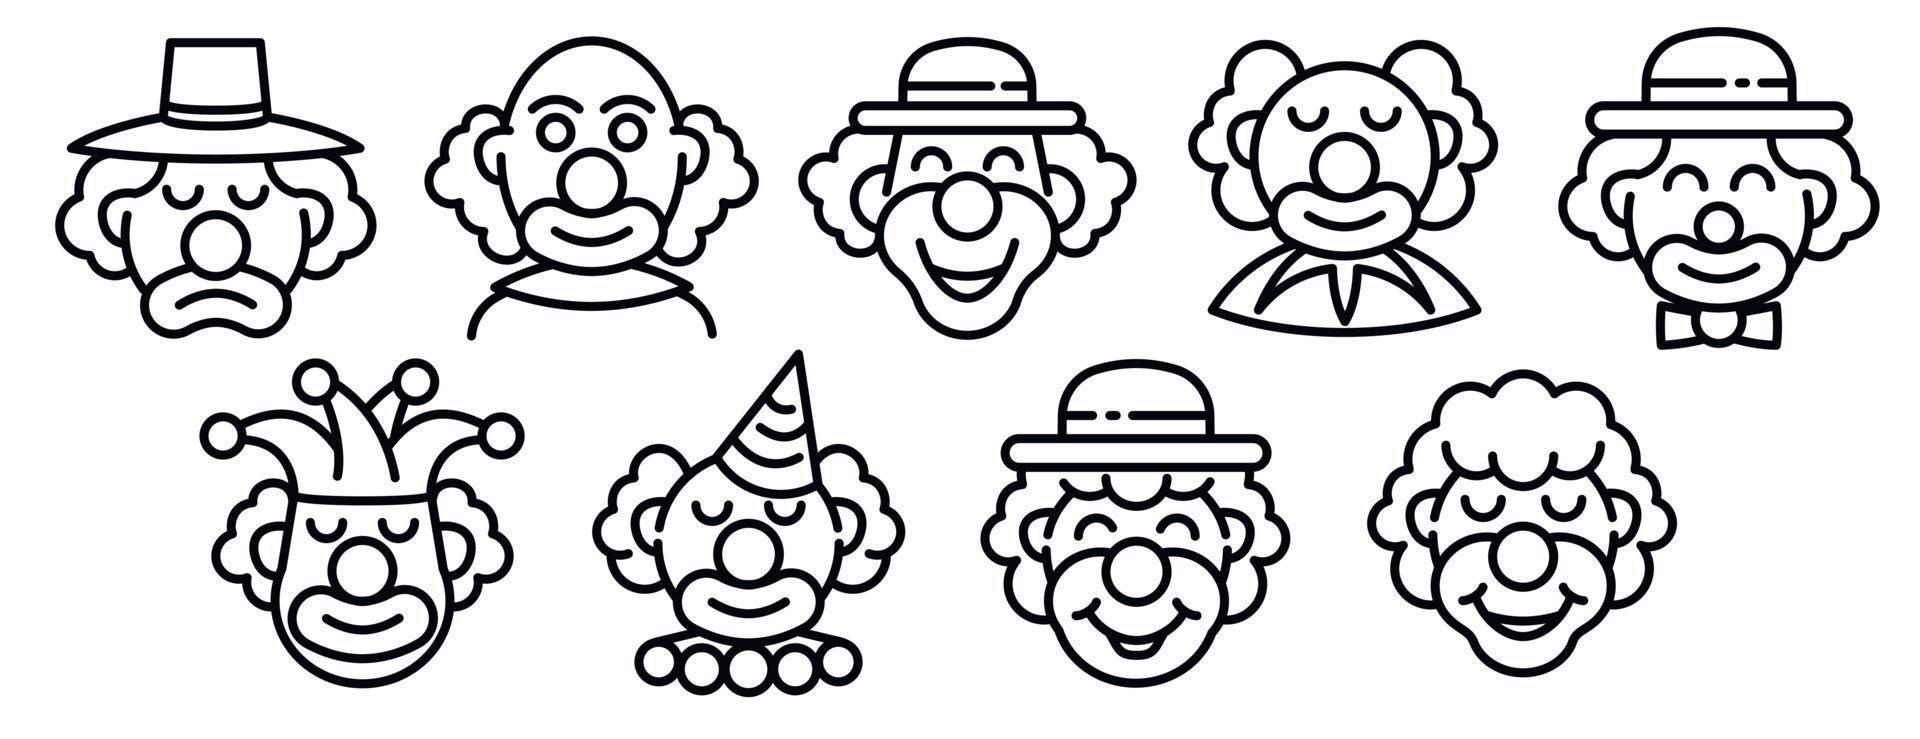 Clown icons set, outline style vector